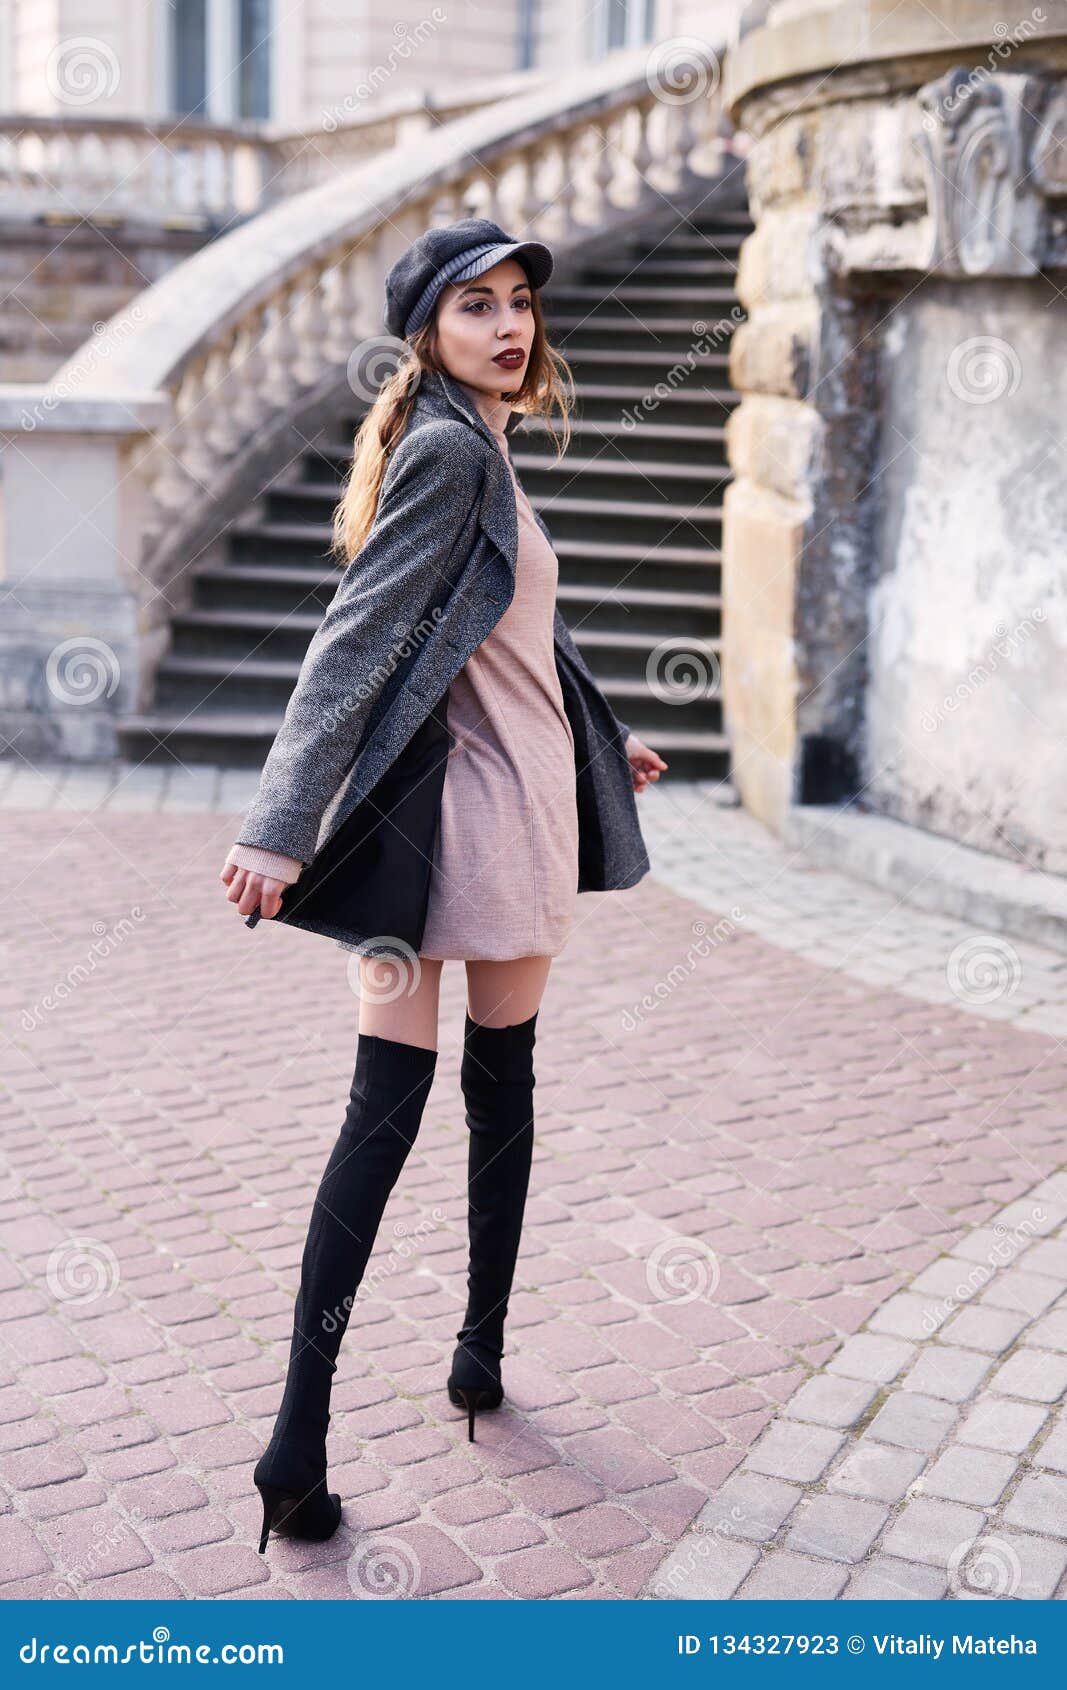 Beautiful Fashionable Woman in Gray Coat and Black Knee High Heel Boots ...